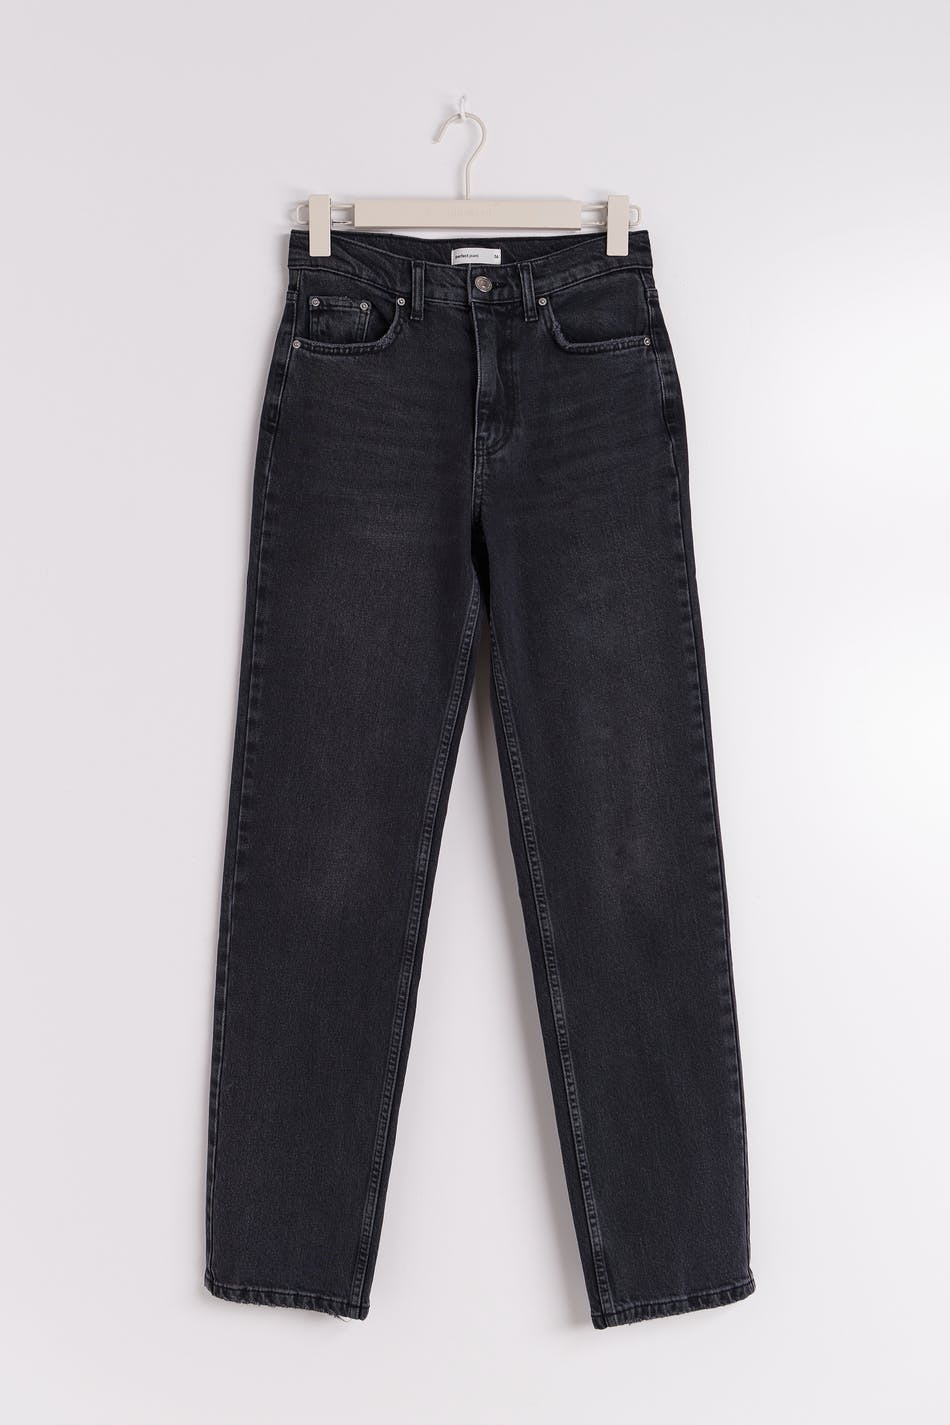 Gina Tricot - Mid straight tall jeans - mid waist jeans - Black - 34 - Female